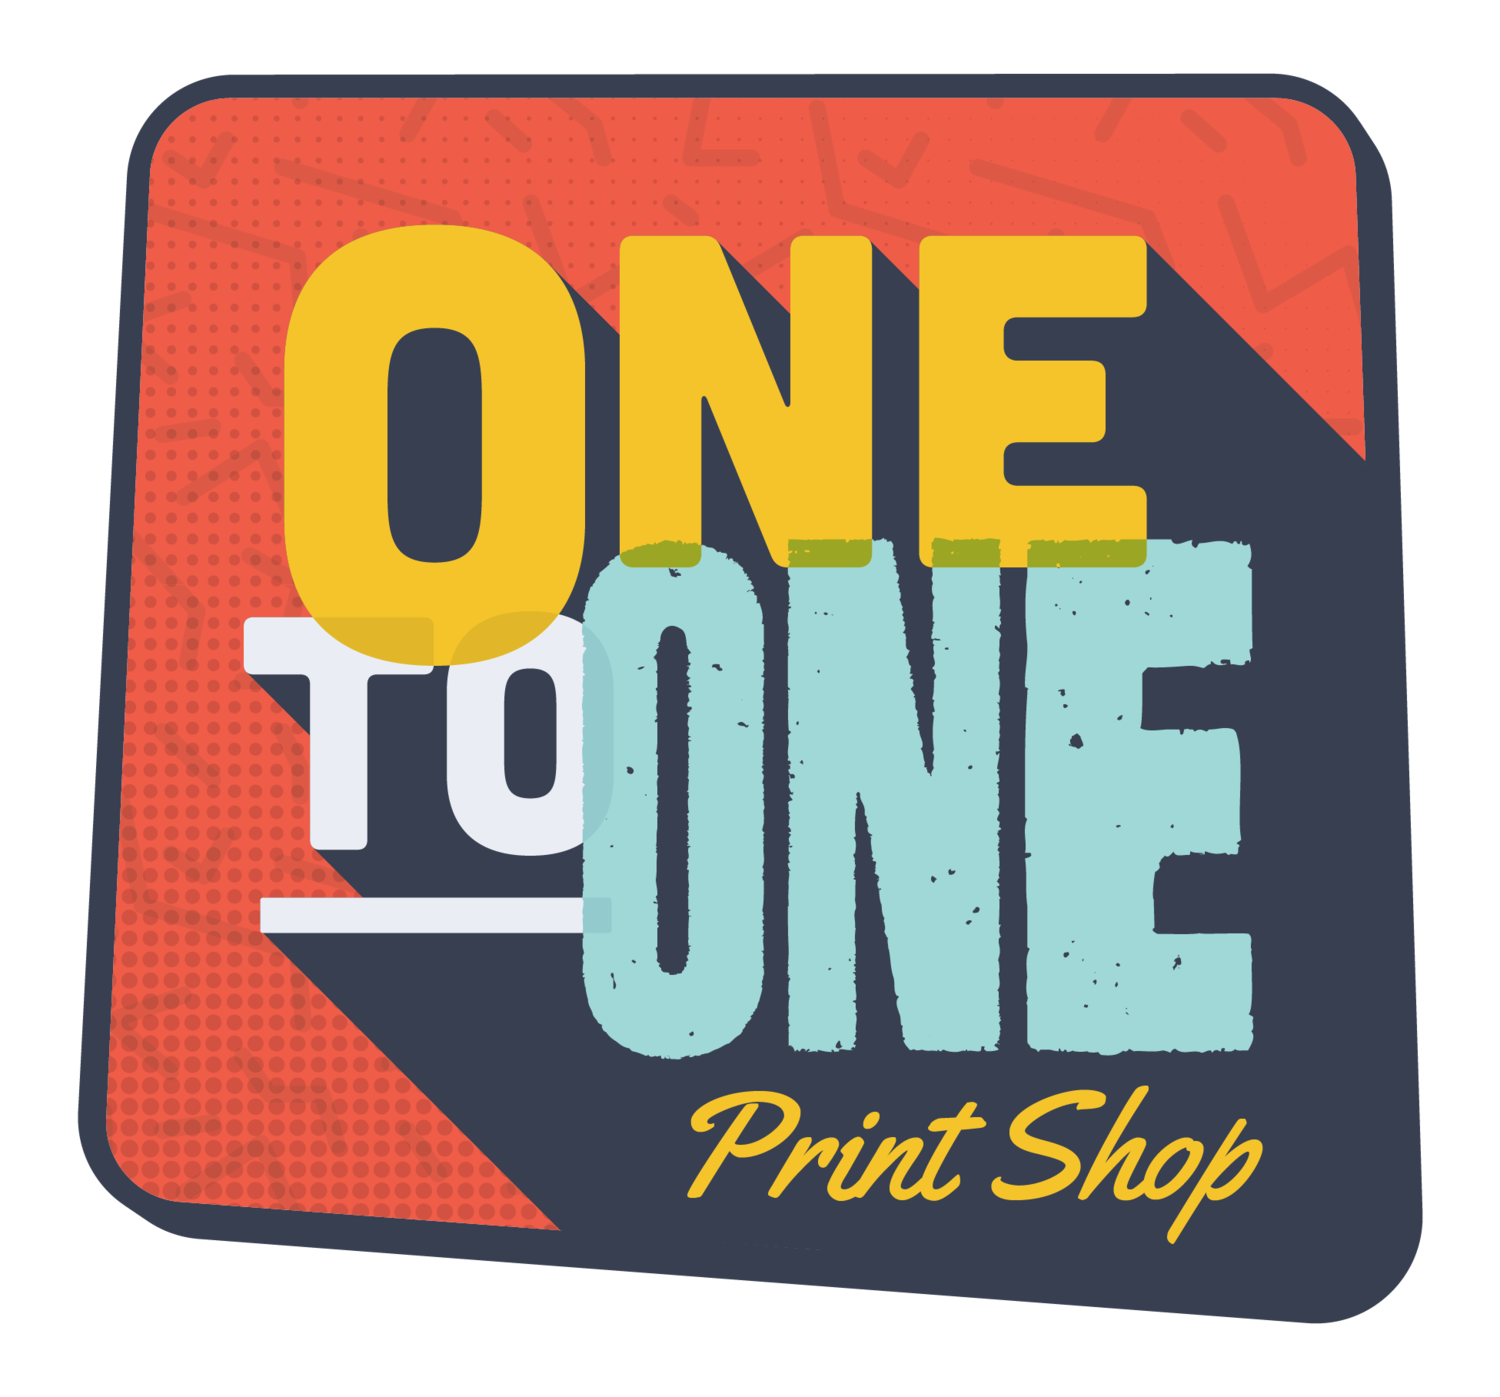 About — One to One Print